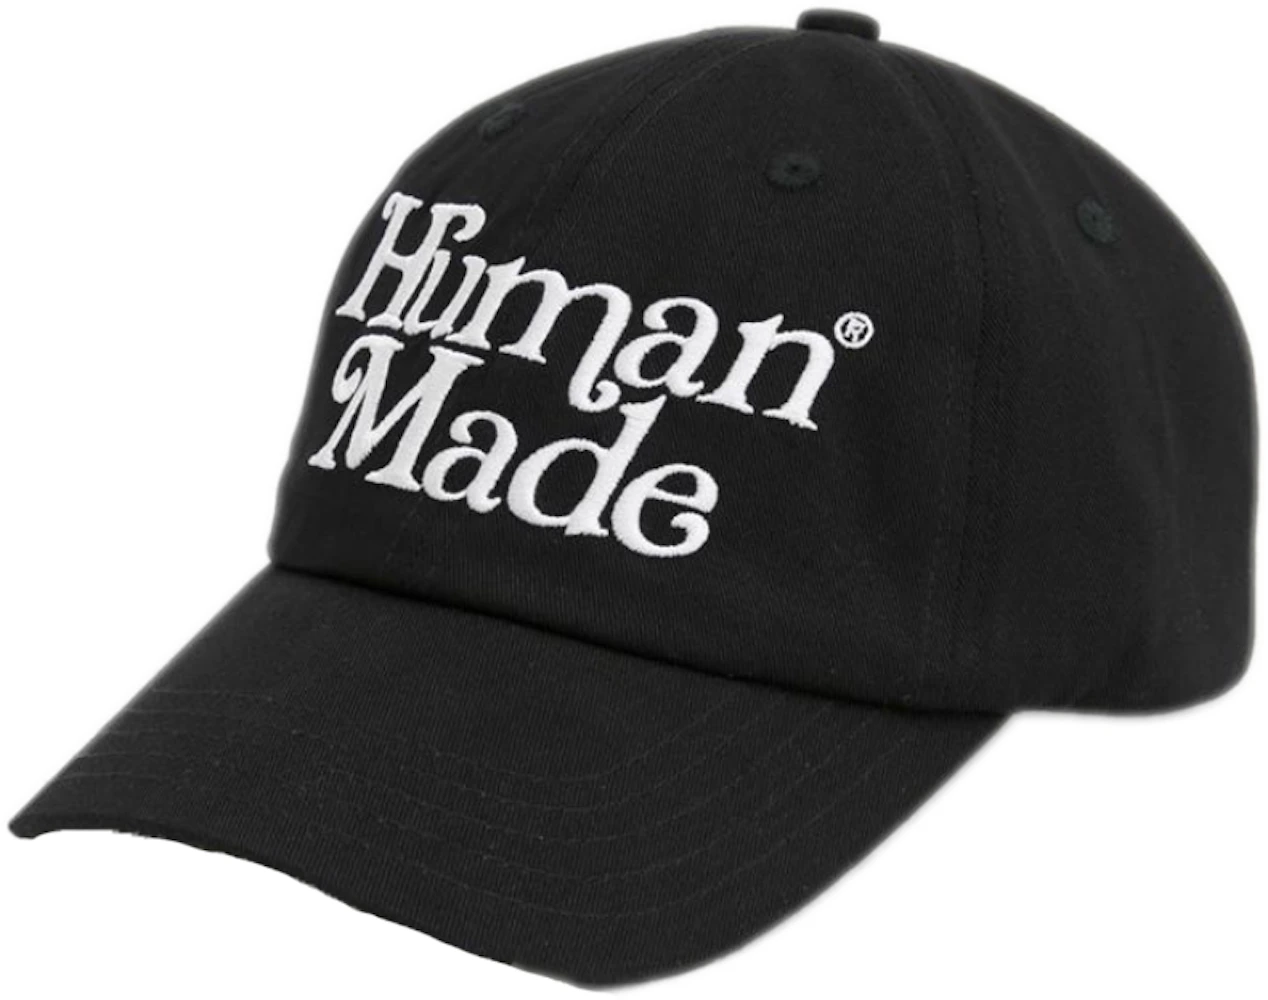 HUMANMADE × Girls Don't Cry TWILL CAPキャップ - キャップ